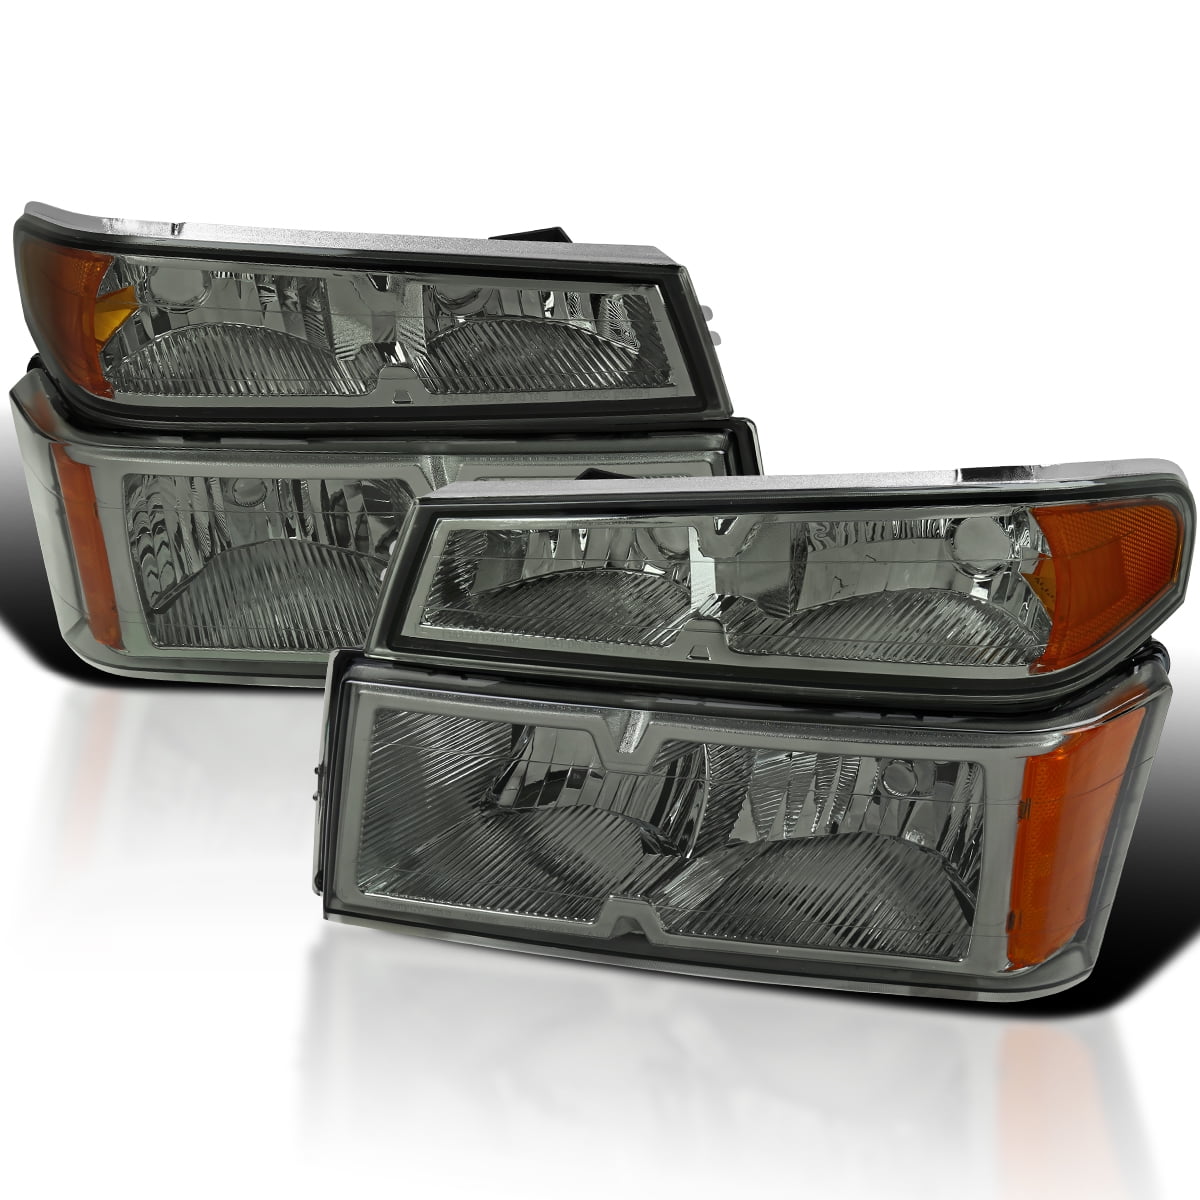 ACANII - For 2004-2012 Chevy Colorado GMC Canyon Black Tail Lights Brake  Lamps Pair Set Driver & Passenger Side